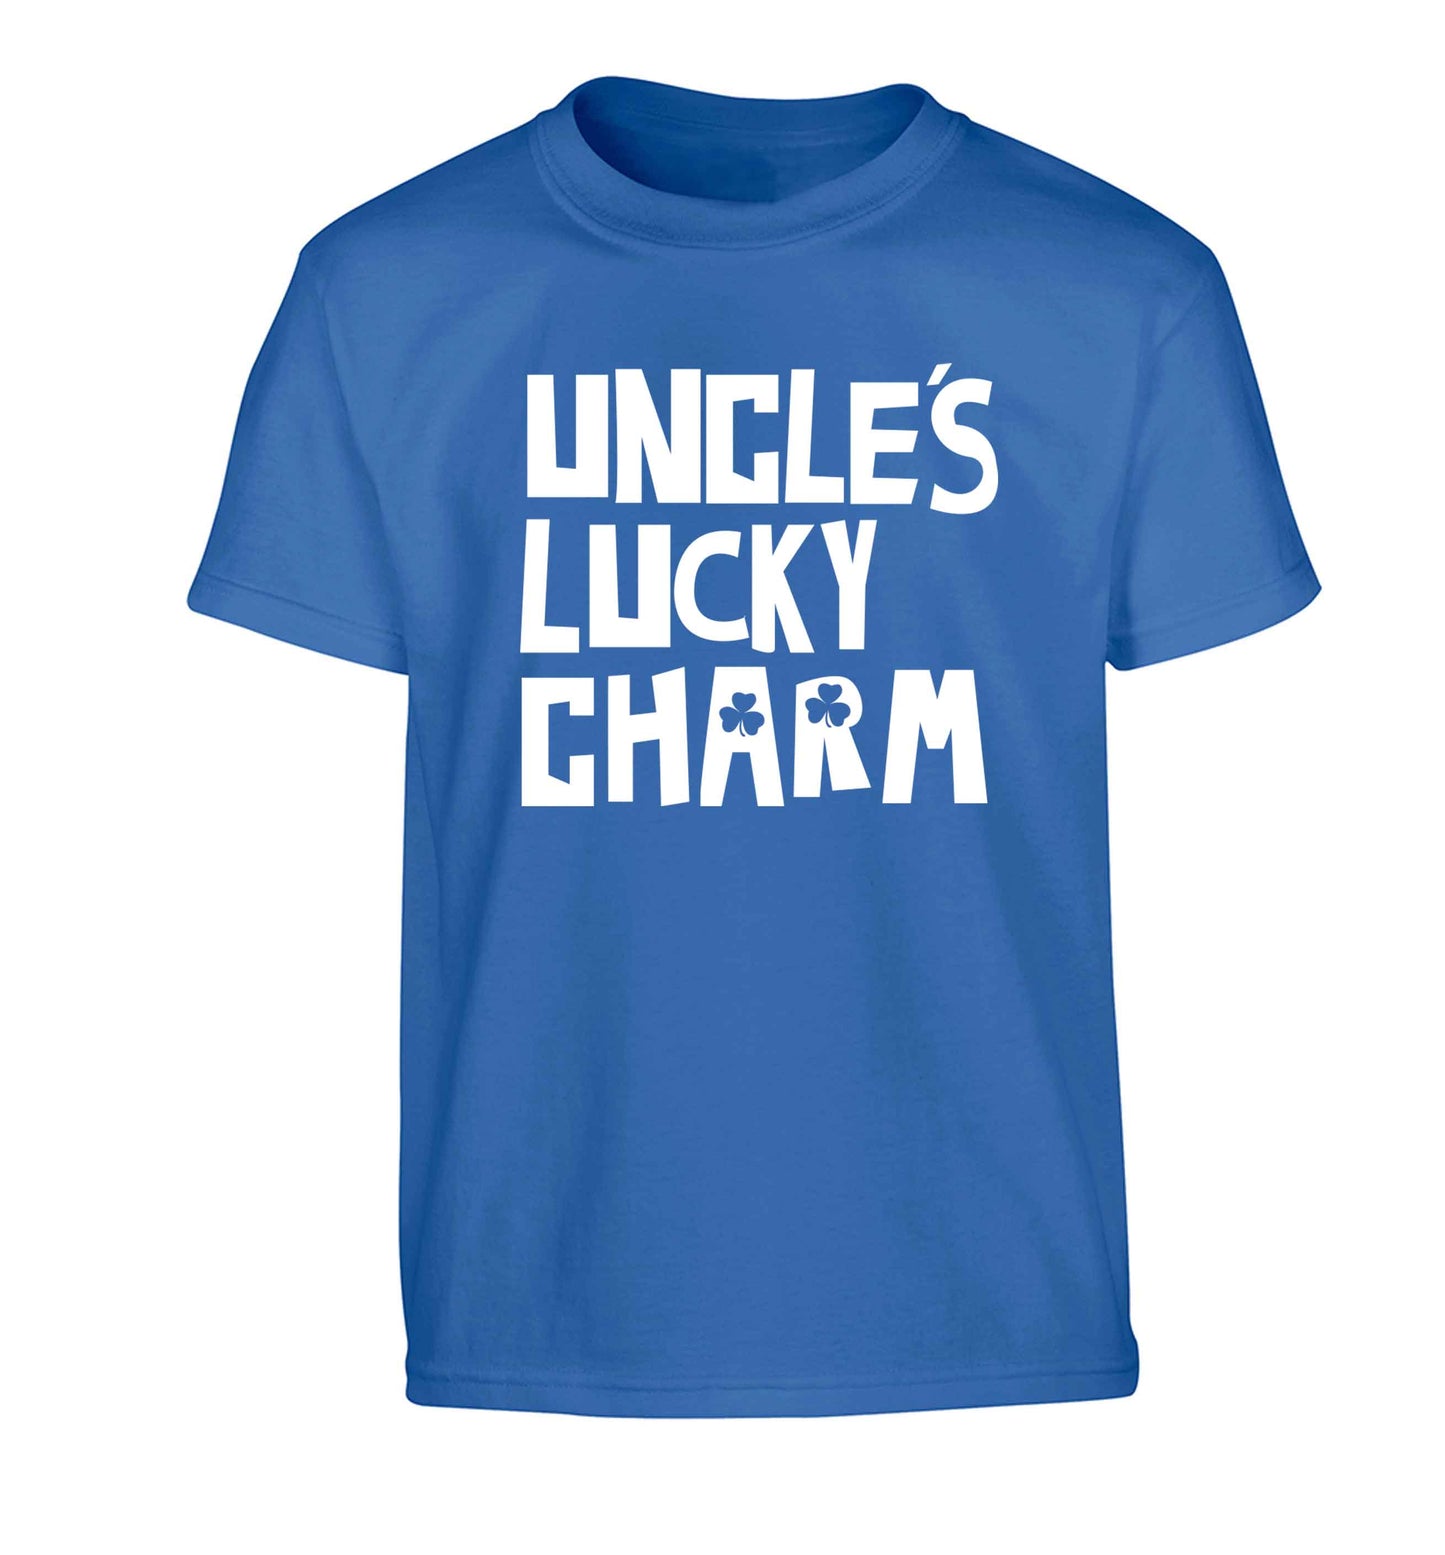 Uncles lucky charm Children's blue Tshirt 12-13 Years